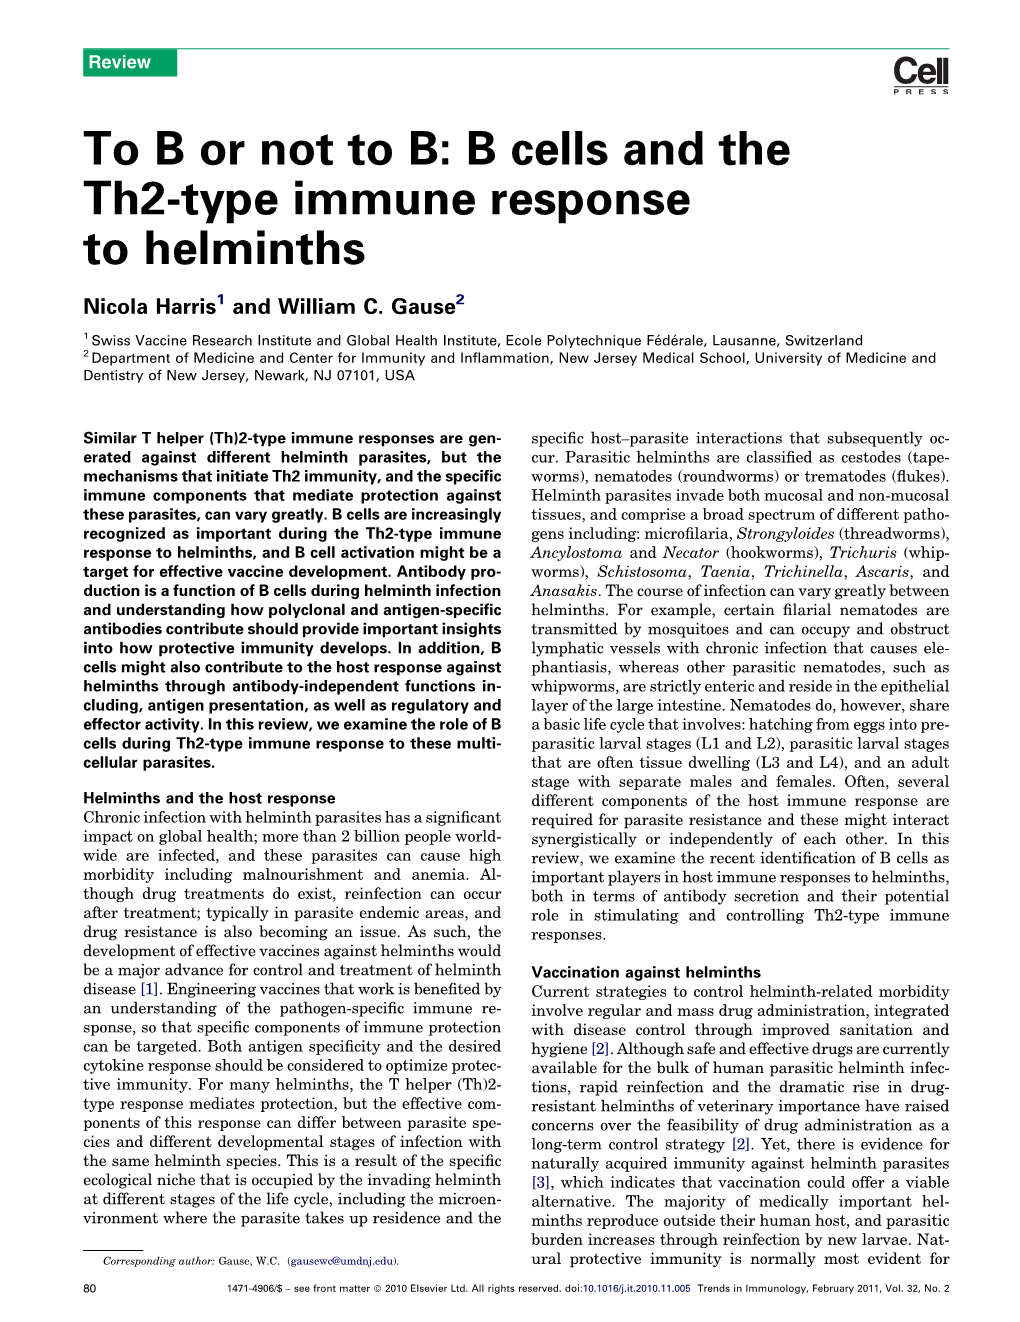 B Cells and the Th2-Type Immune Response to Helminths